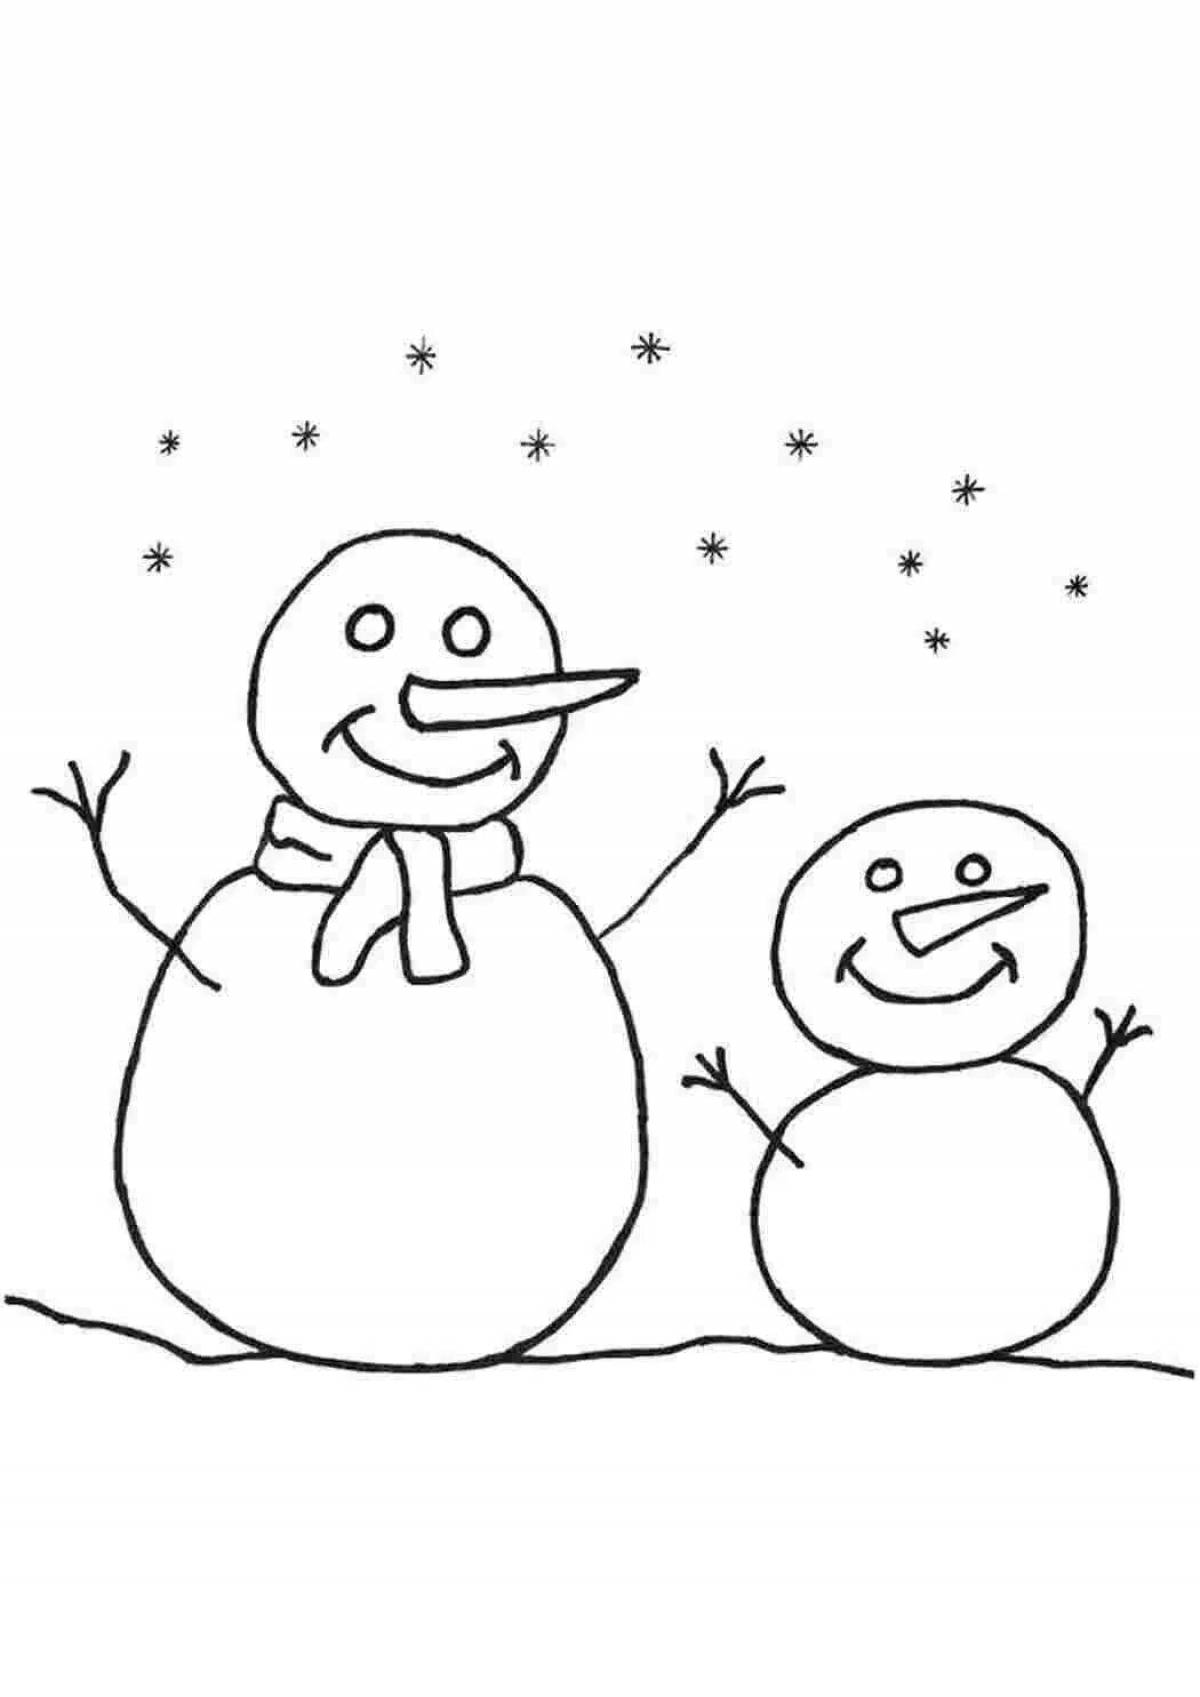 Humorous coloring book snowman for children 5 6